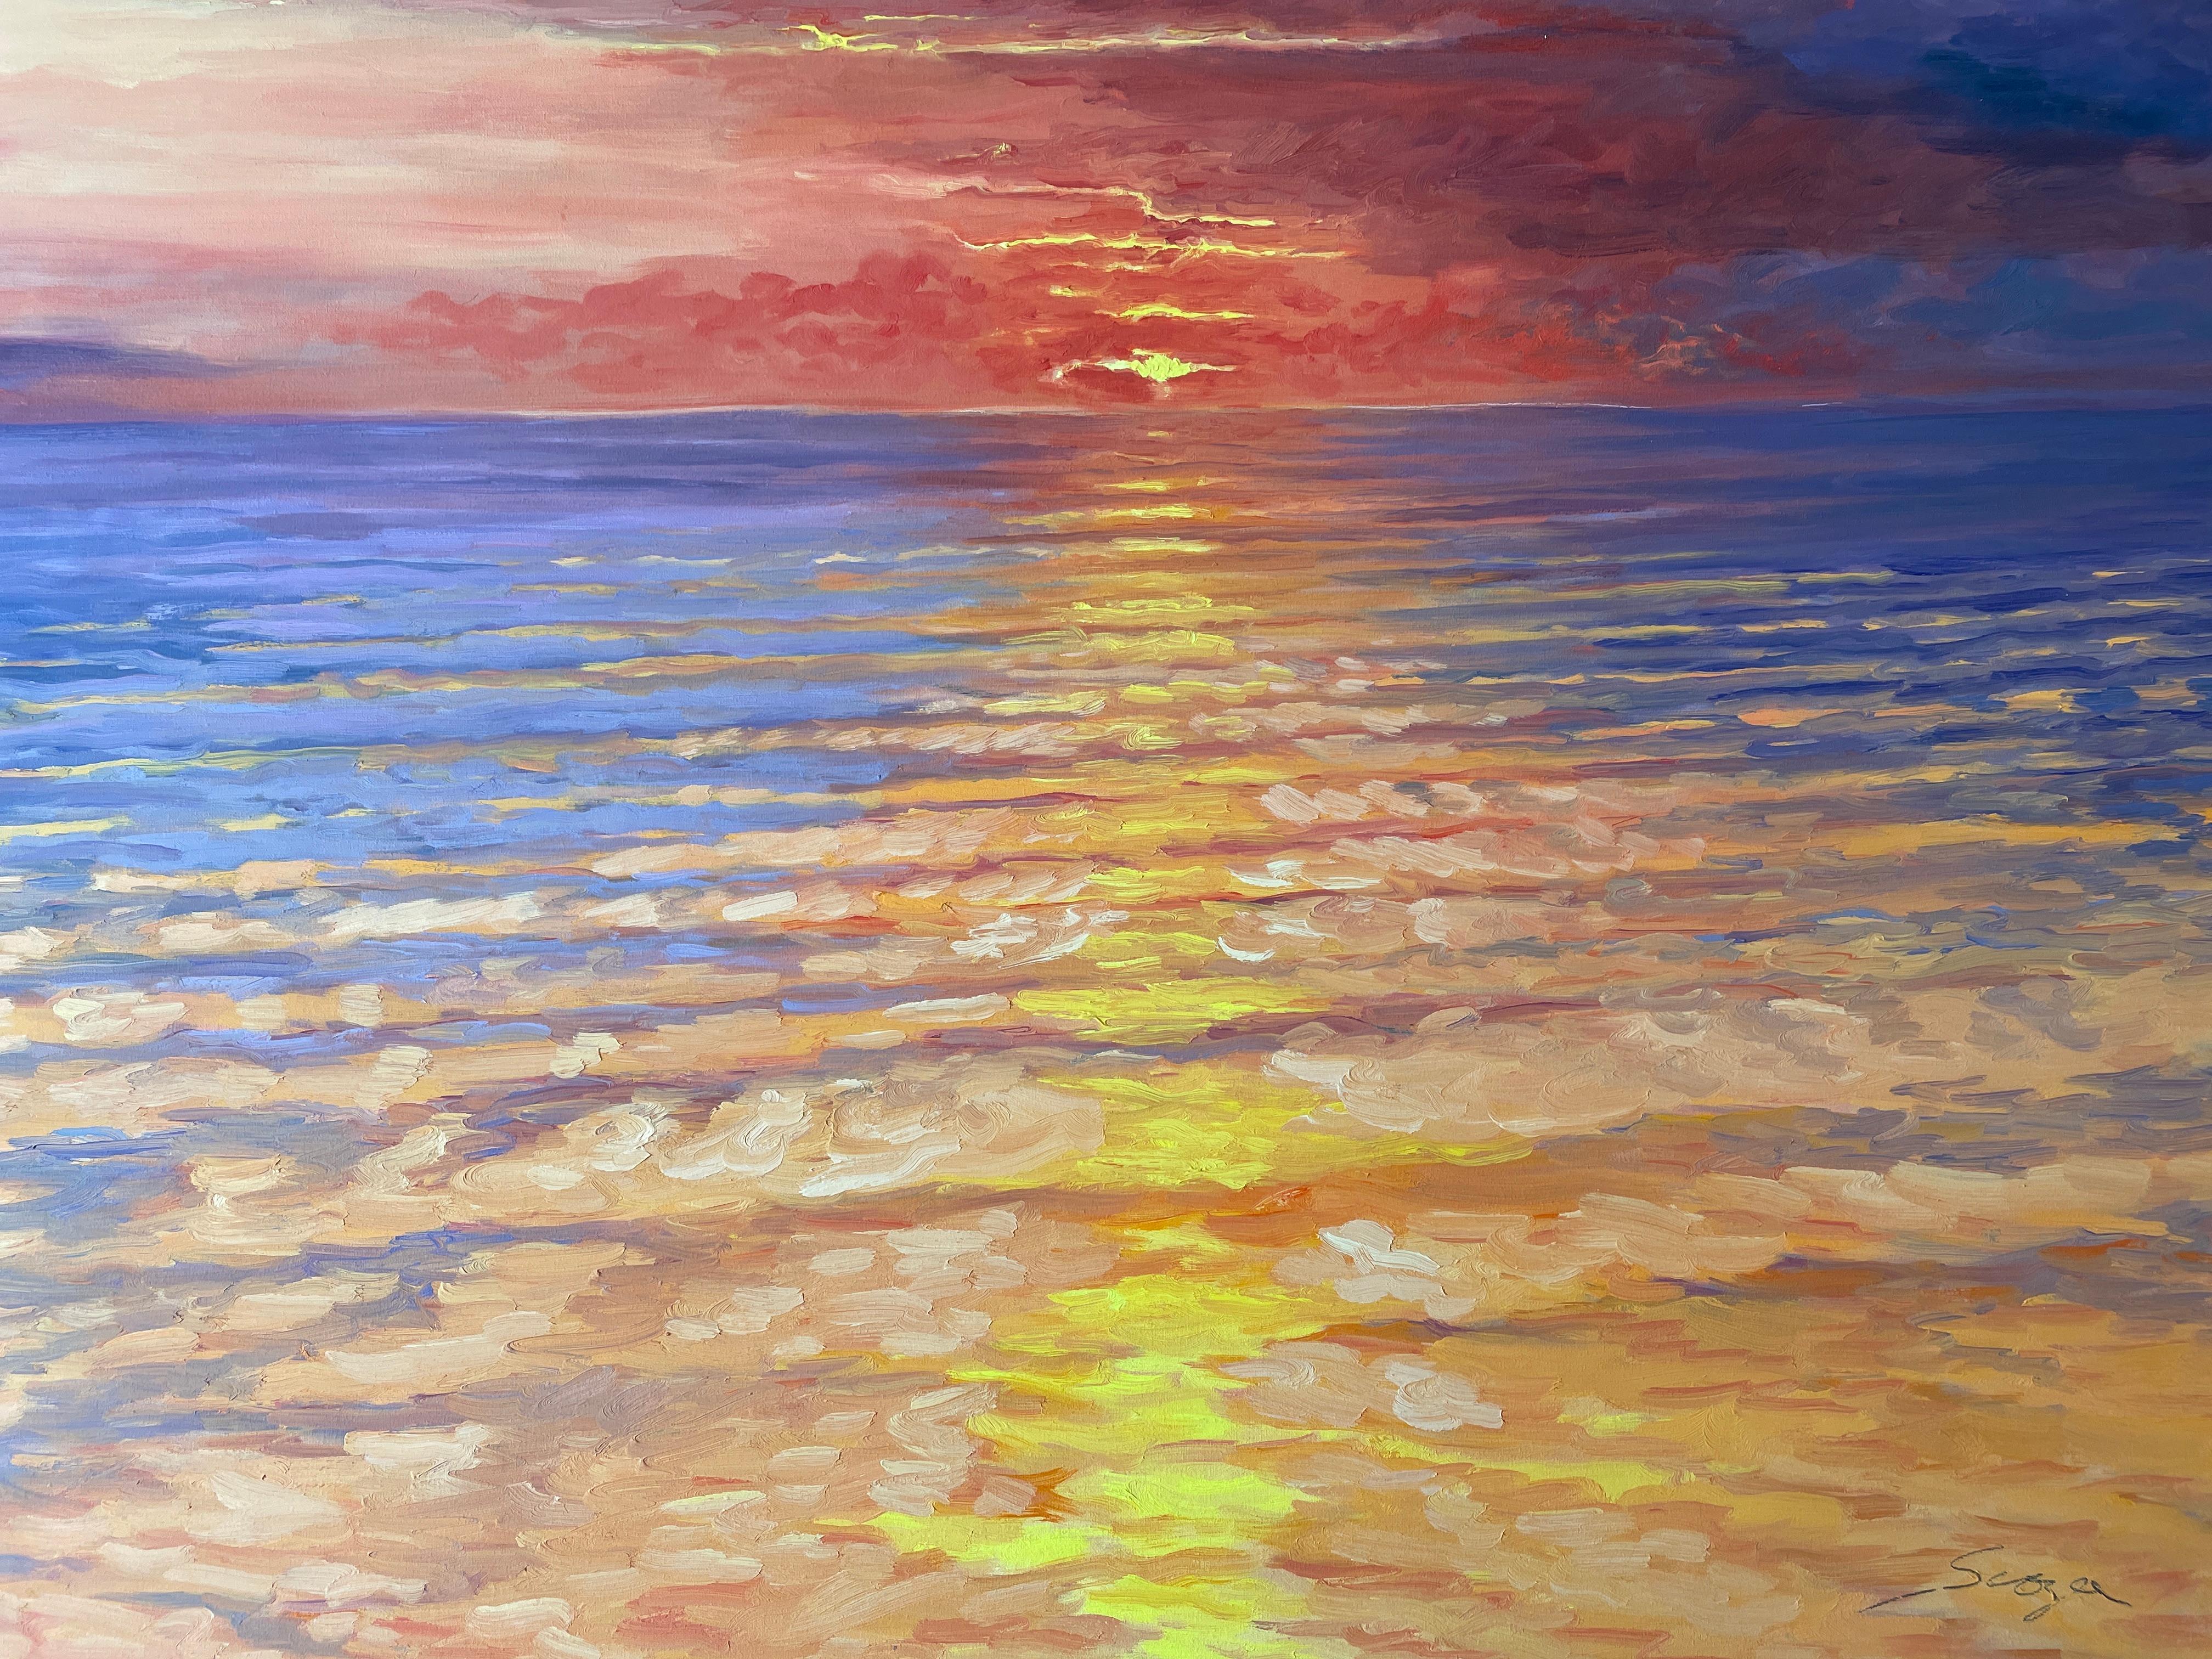 title for sunset painting